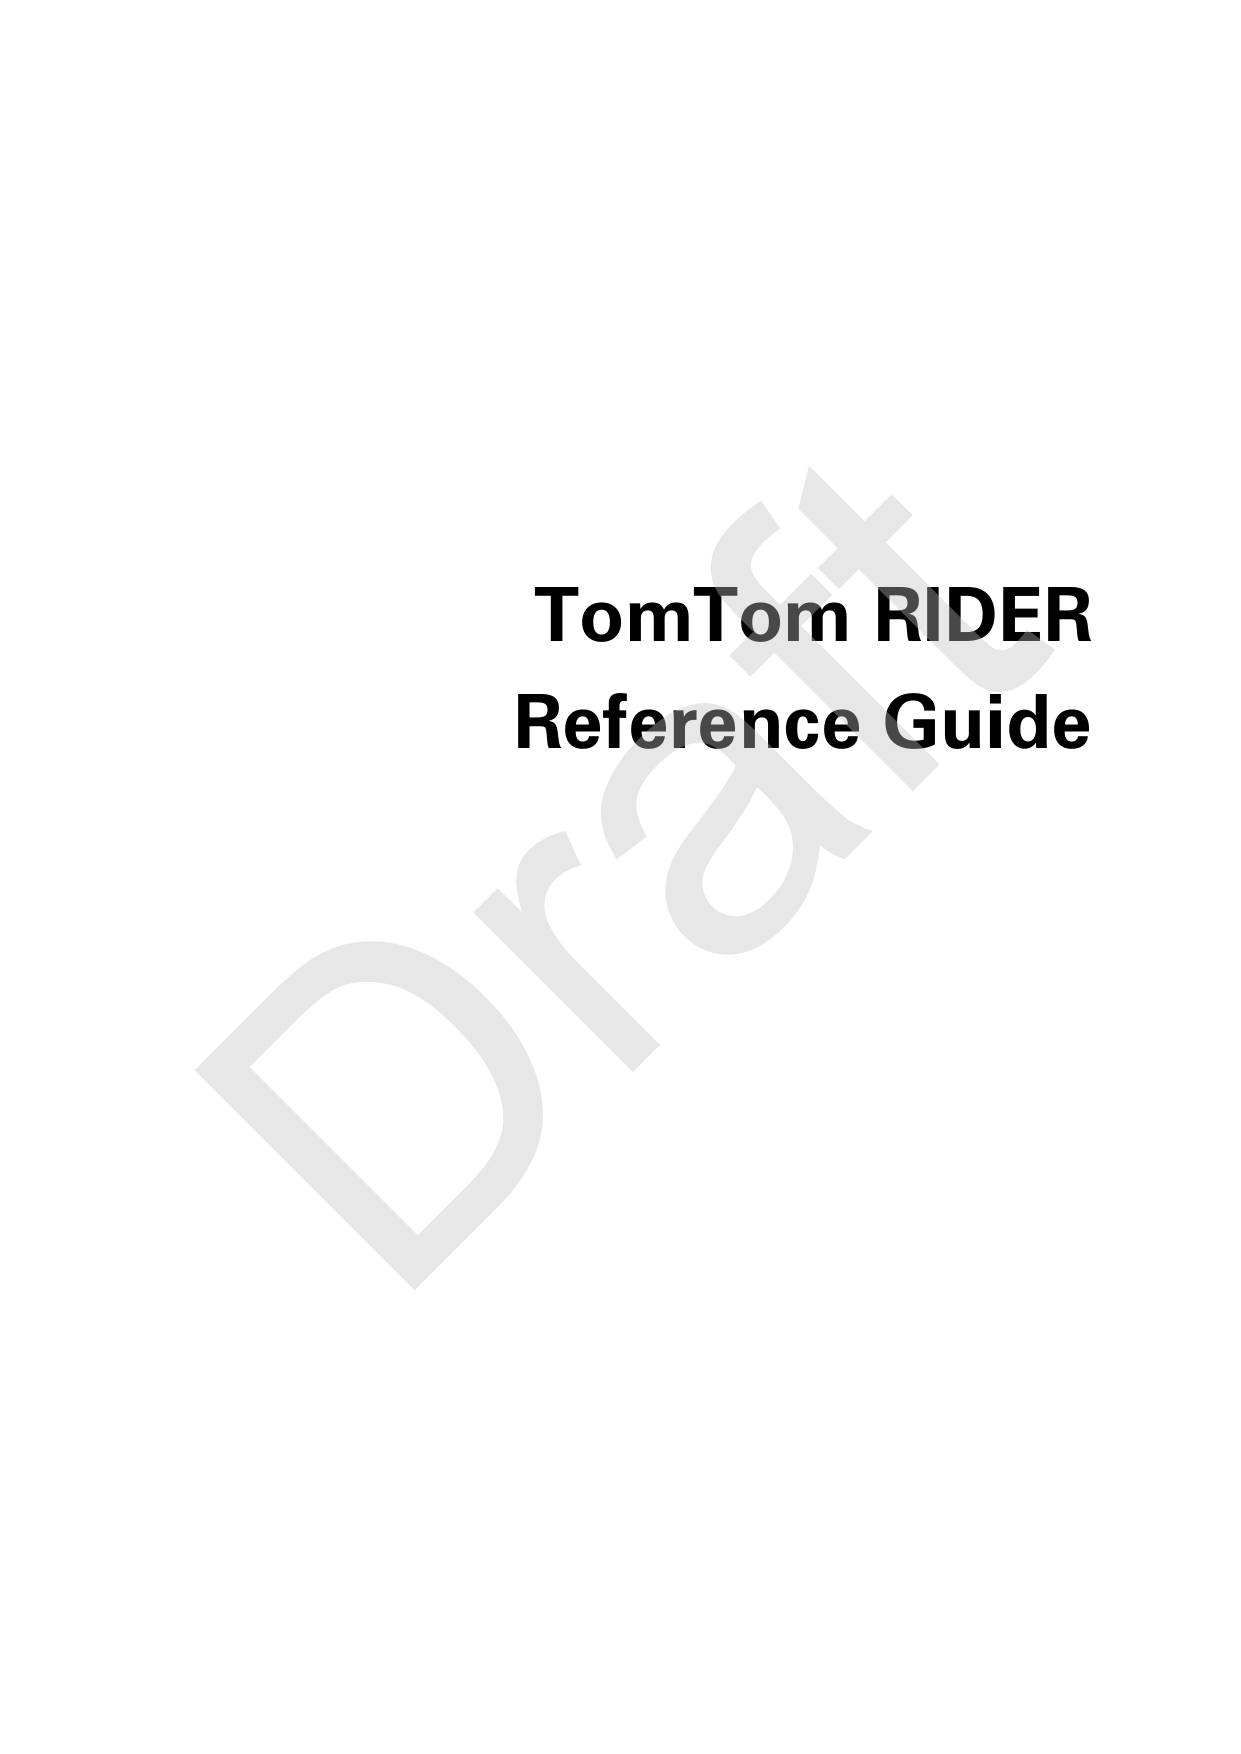  TomTom RIDER Reference Guide  Draft